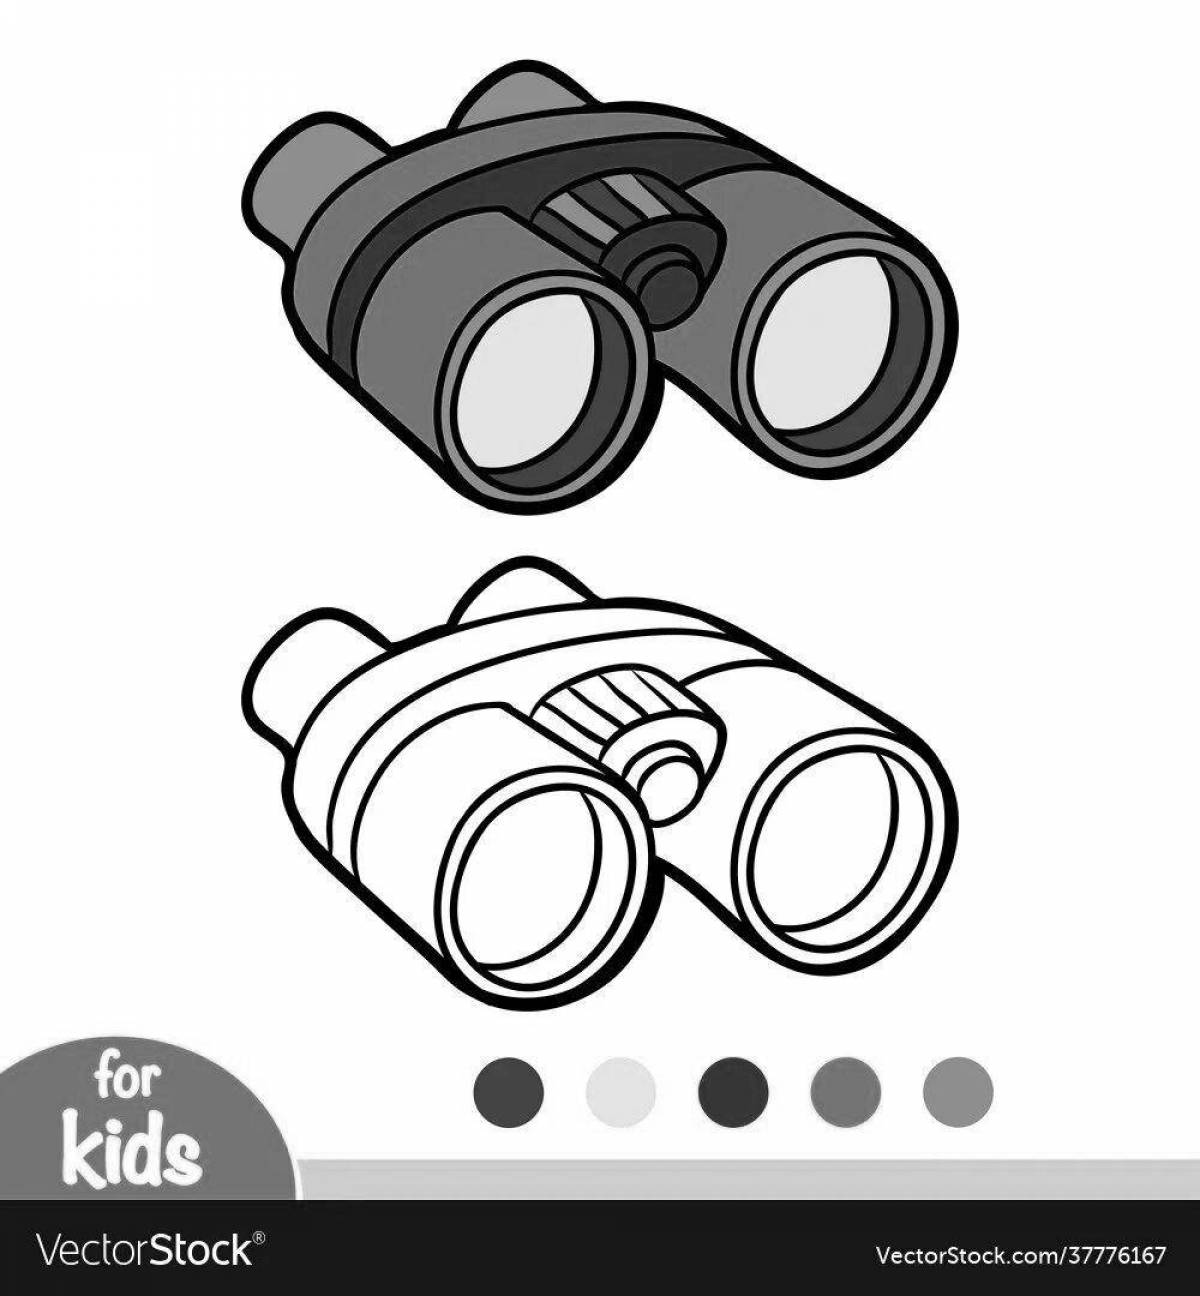 Fun coloring pages with binoculars for kids